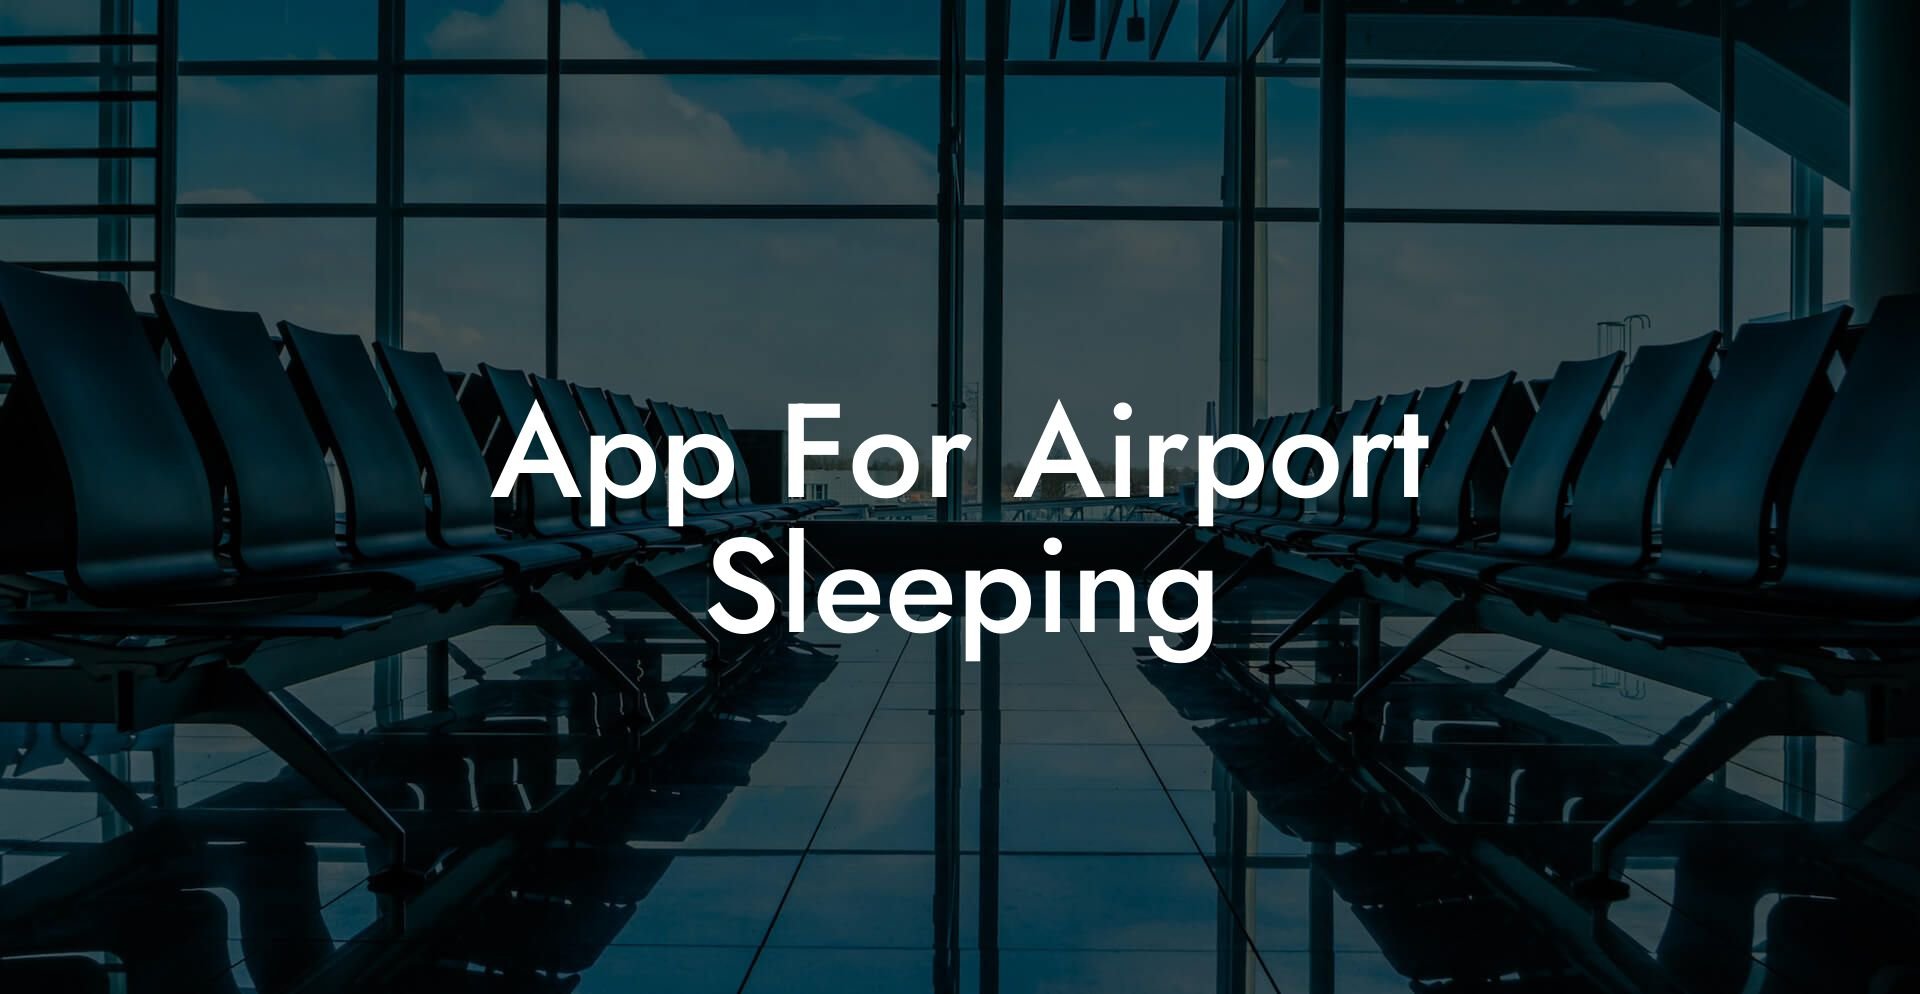 App For Airport Sleeping